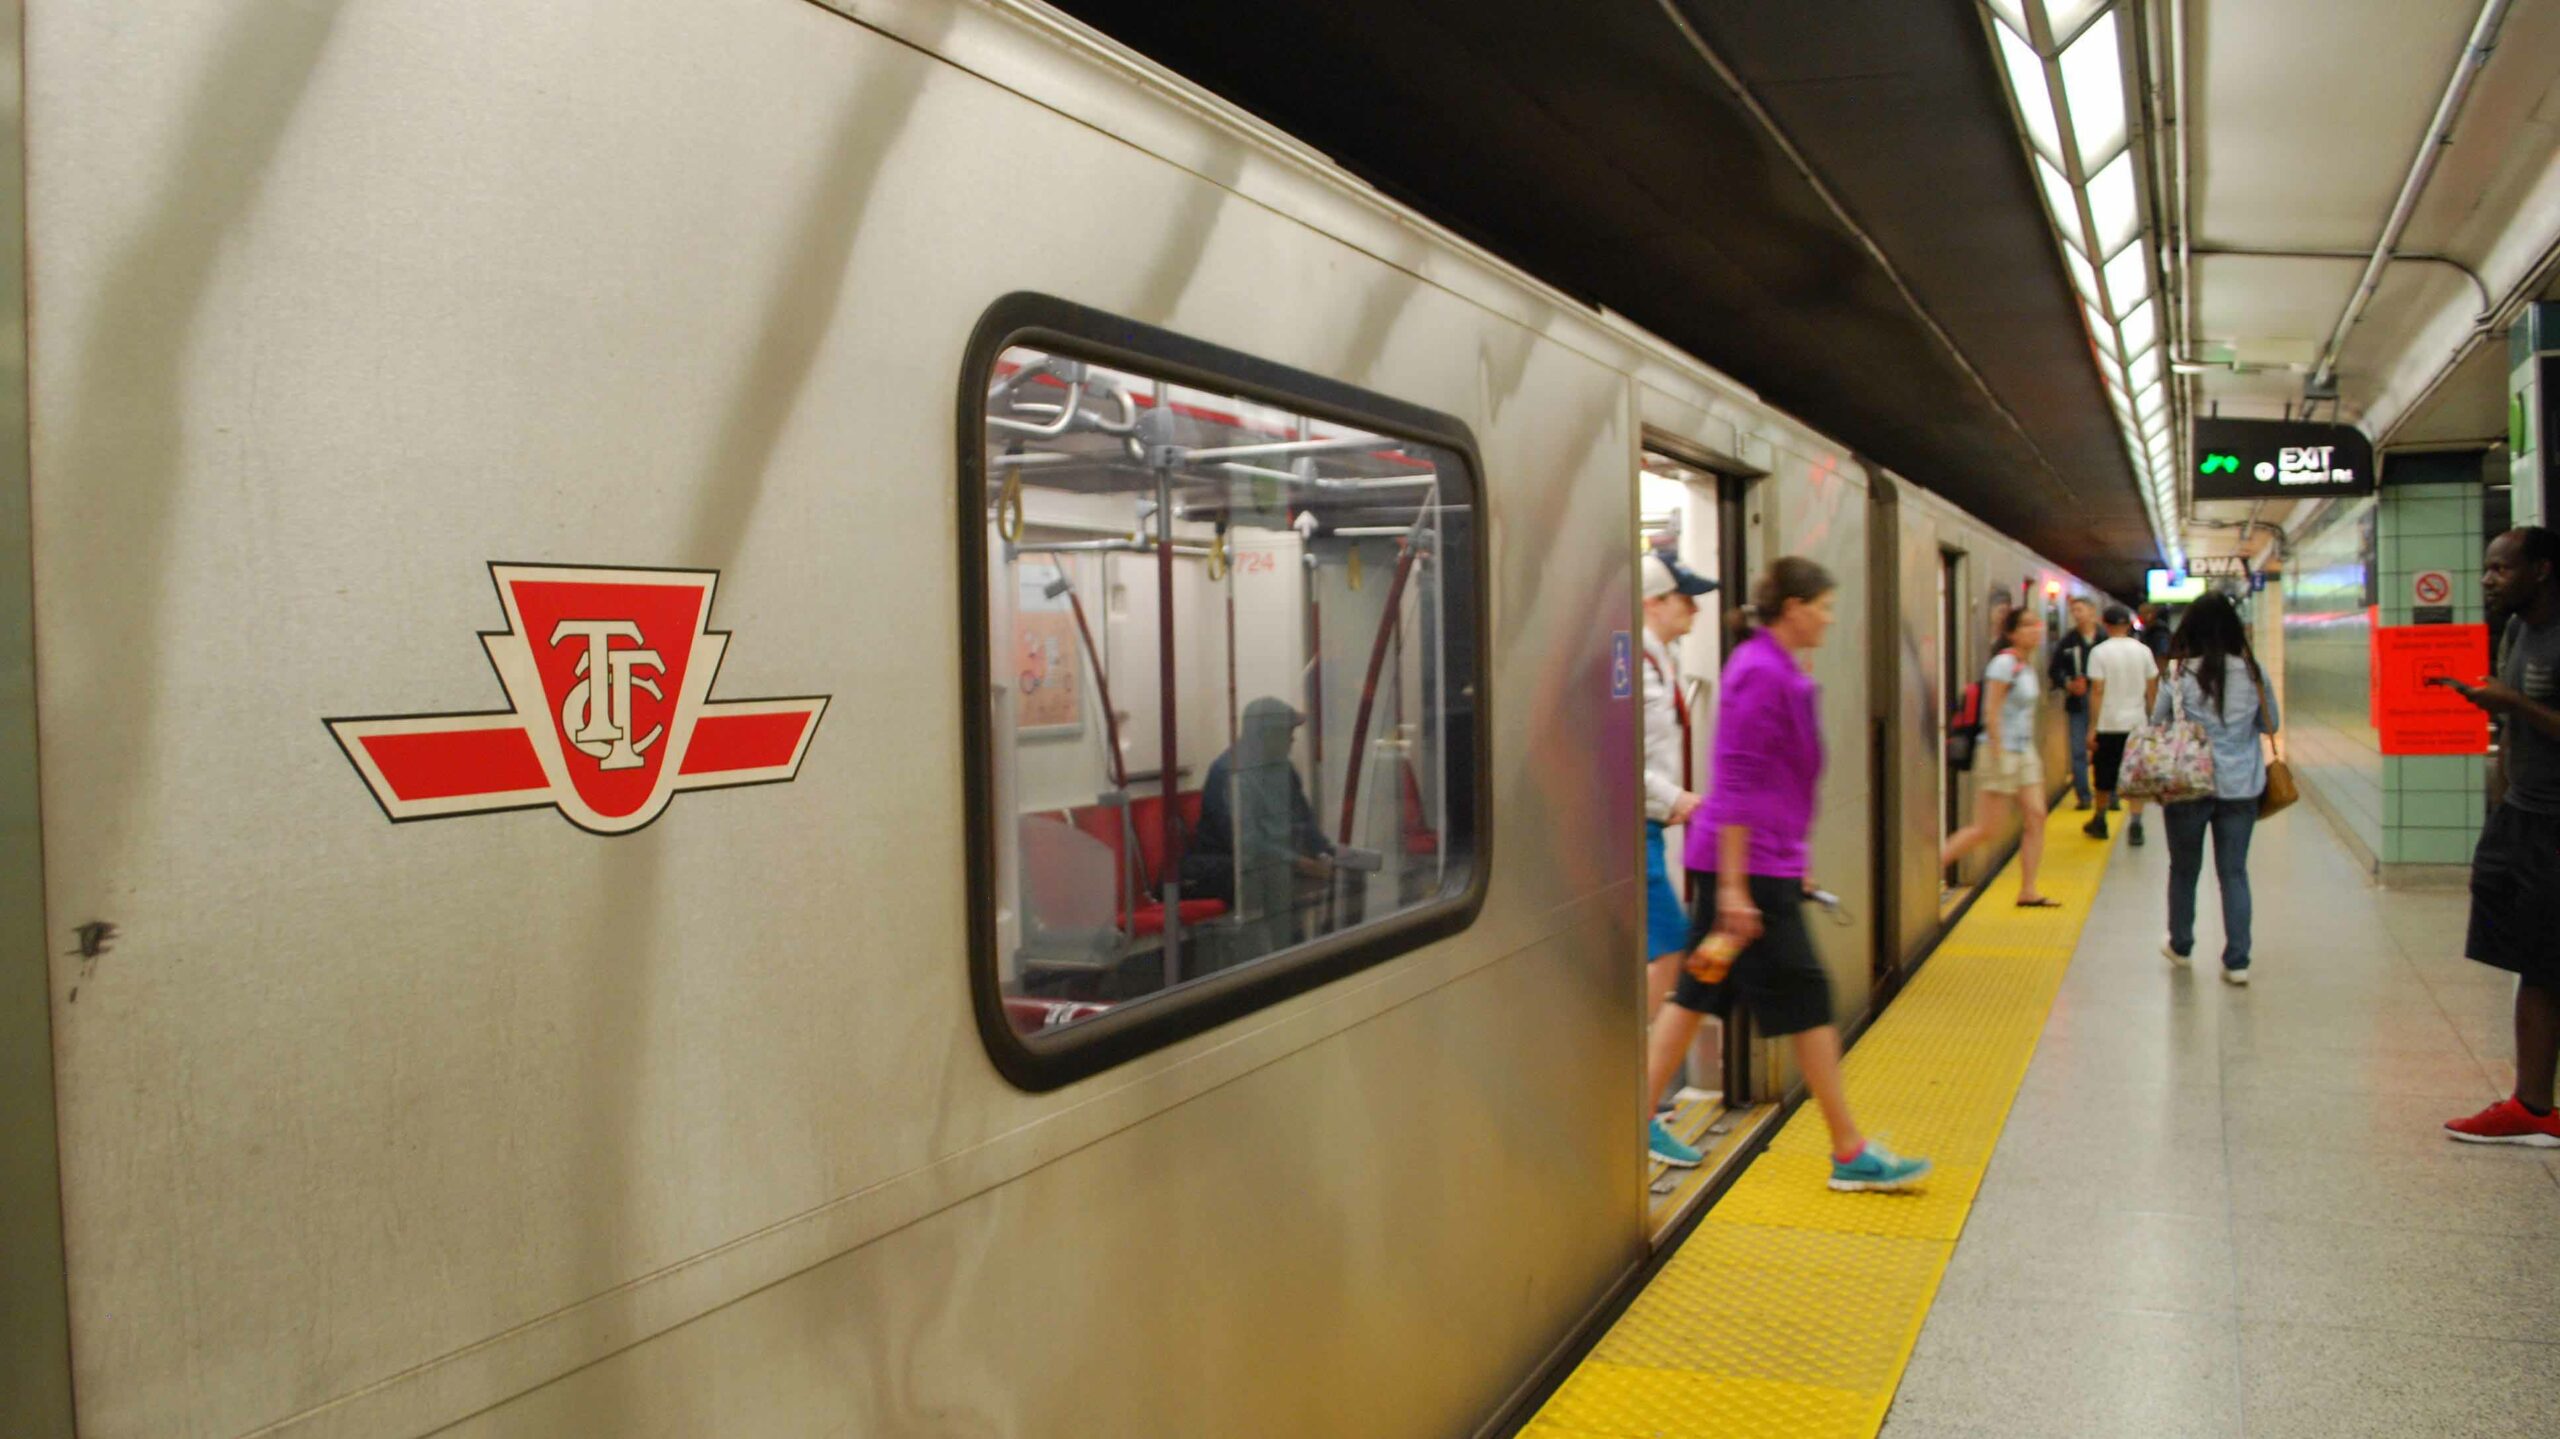 Bell and Telus want the federal government to help them gain network access on the TTC